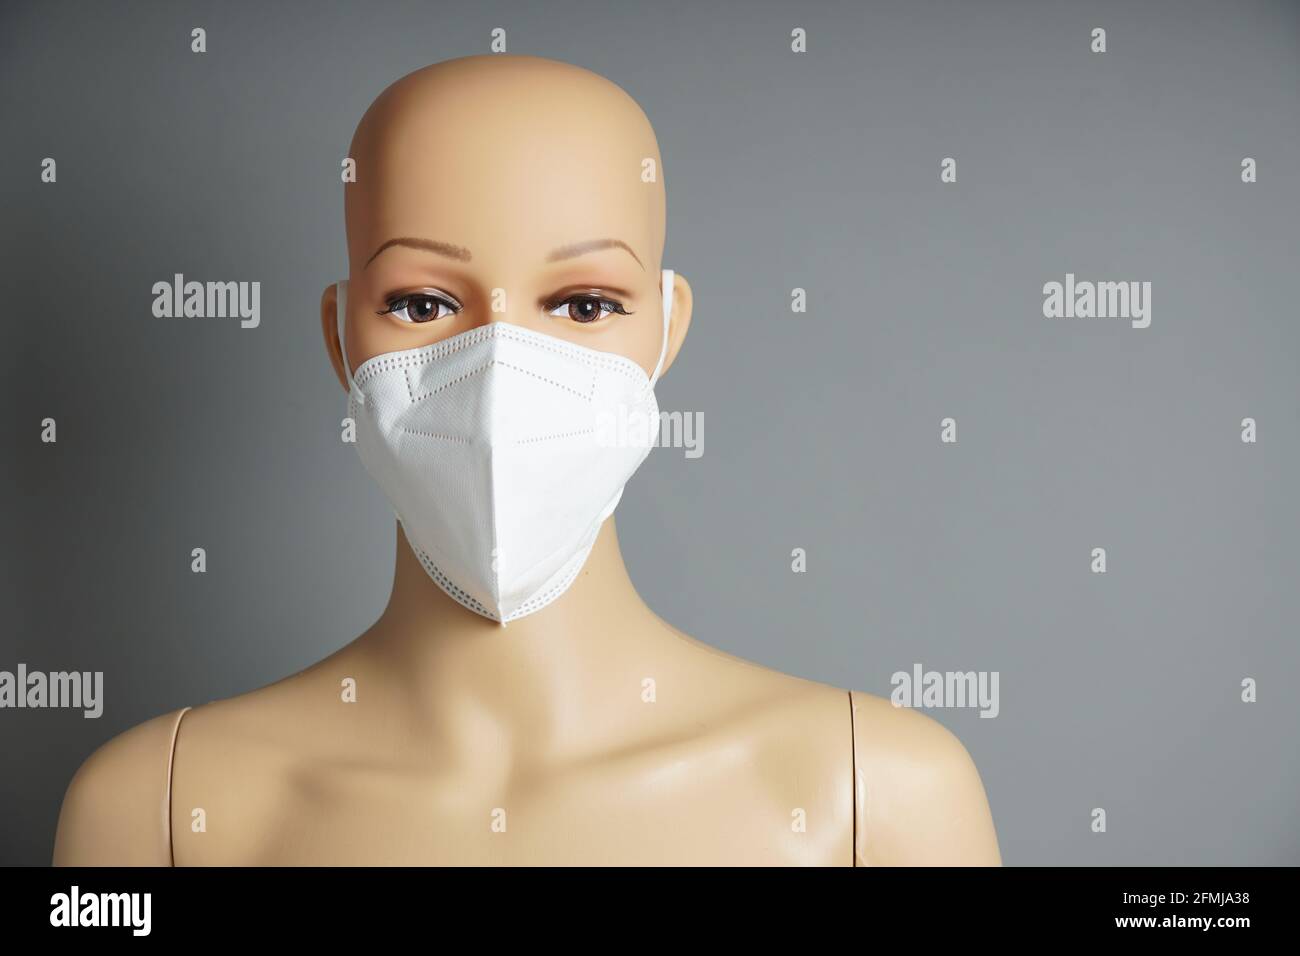 shop window mannequin or display dummy head wearing FFP2 face mask Stock Photo